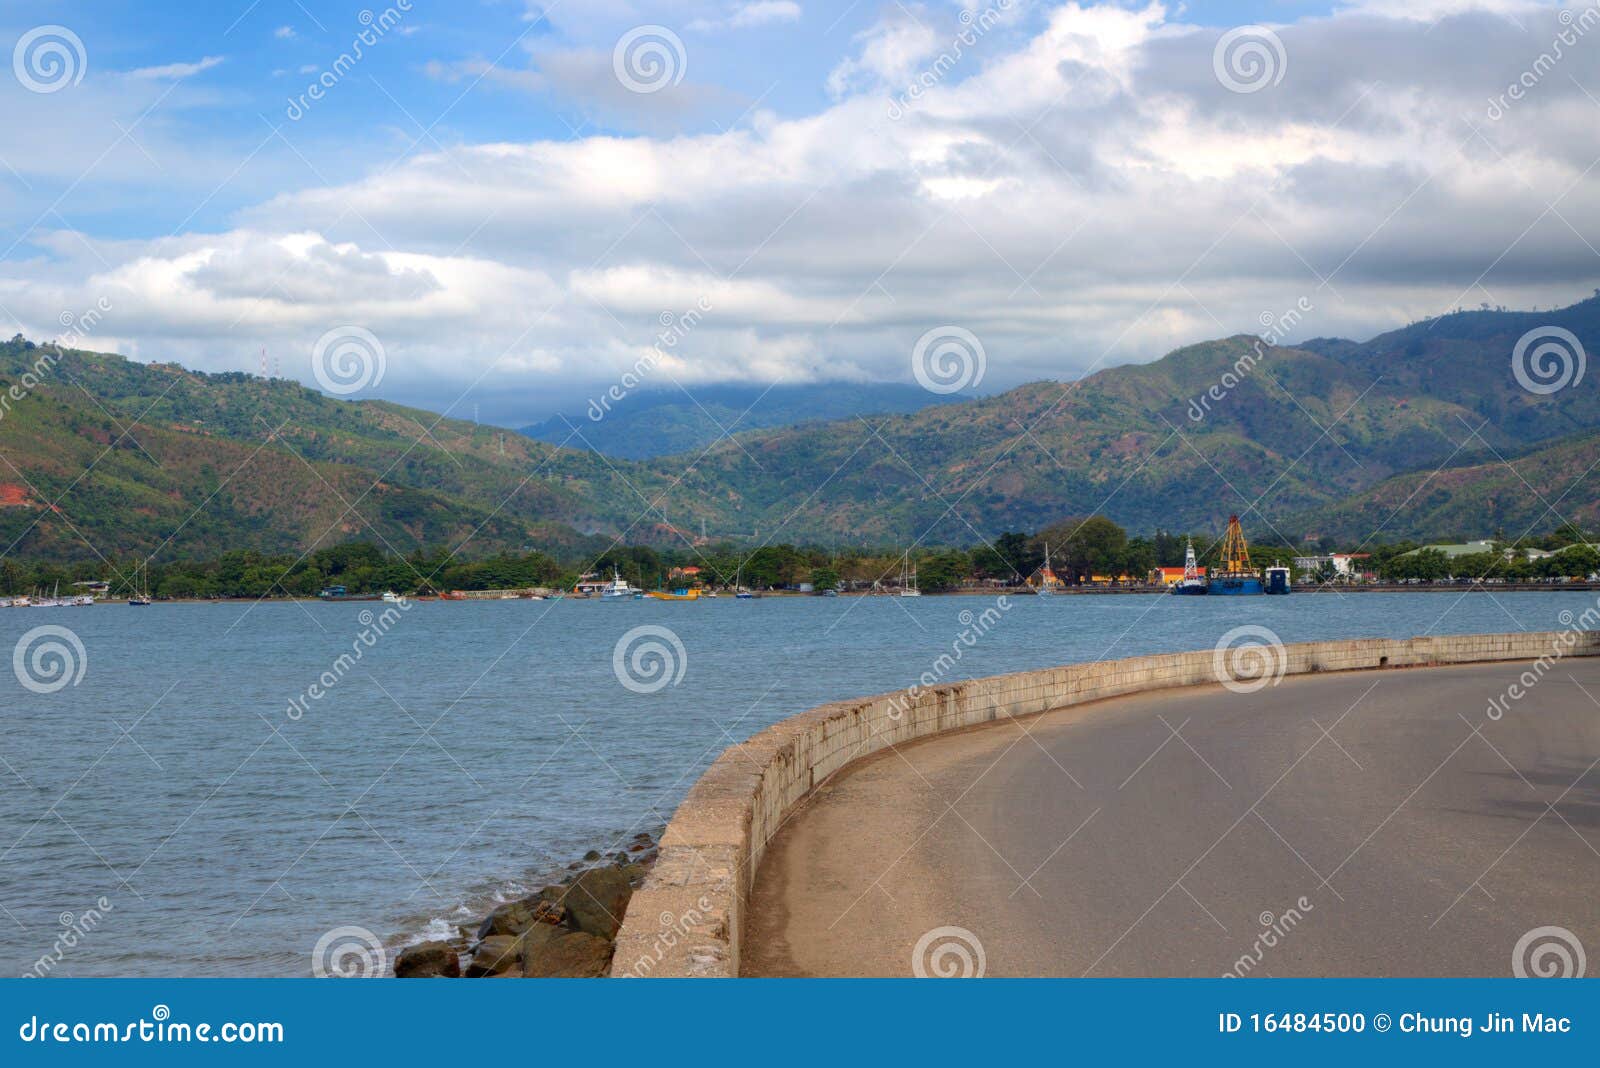 view of dili town in timor leste